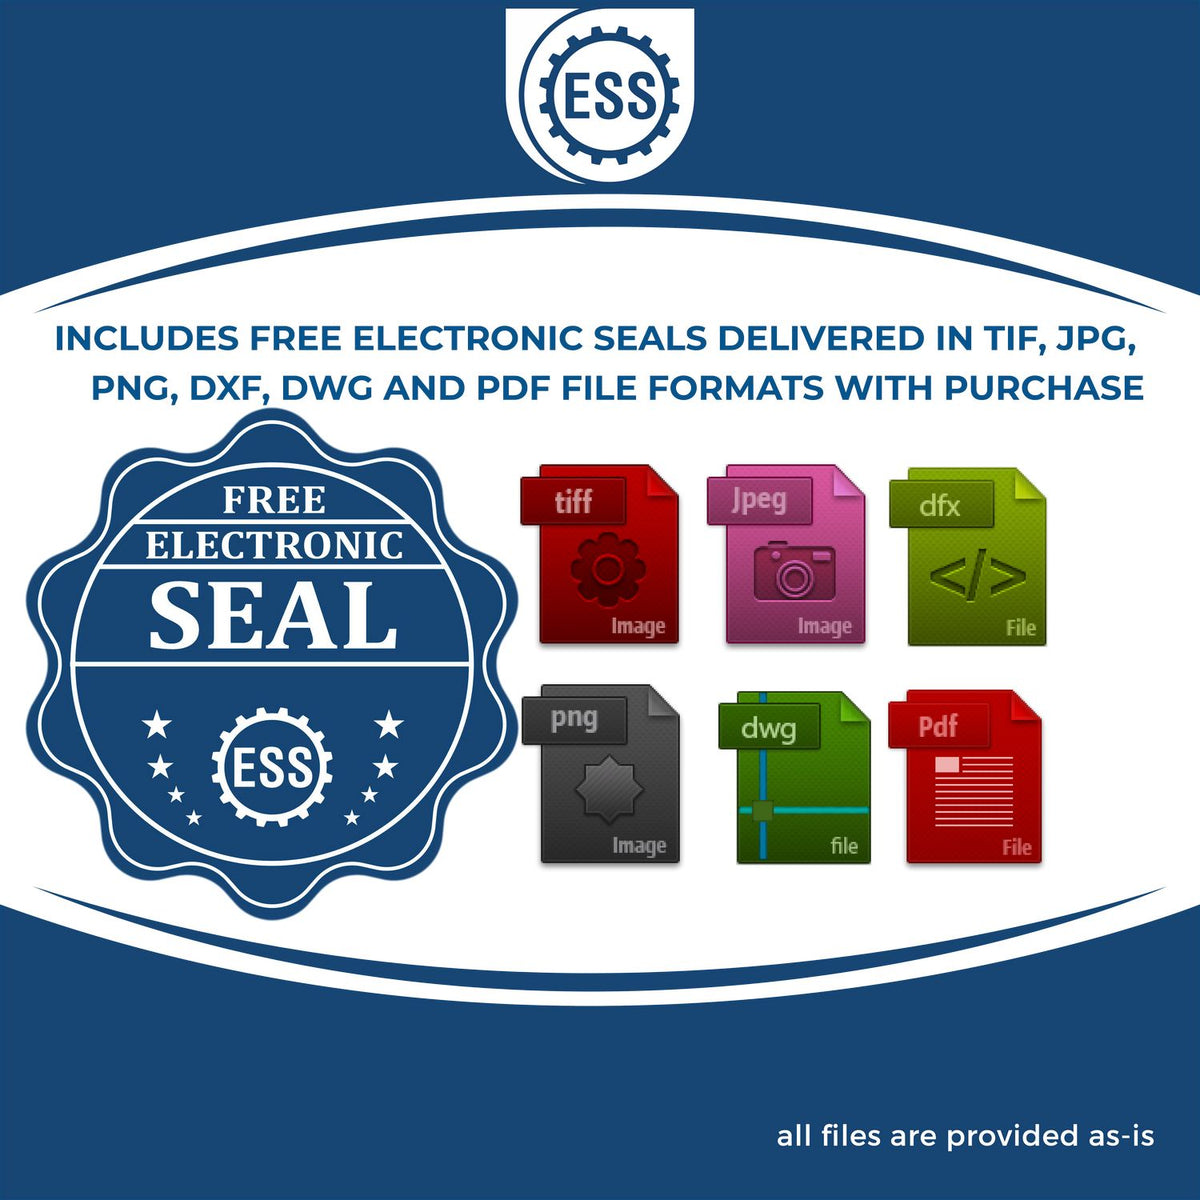 An infographic for the free electronic seal for the Self-Inking Arkansas PE Stamp illustrating the different file type icons such as DXF, DWG, TIF, JPG and PNG.